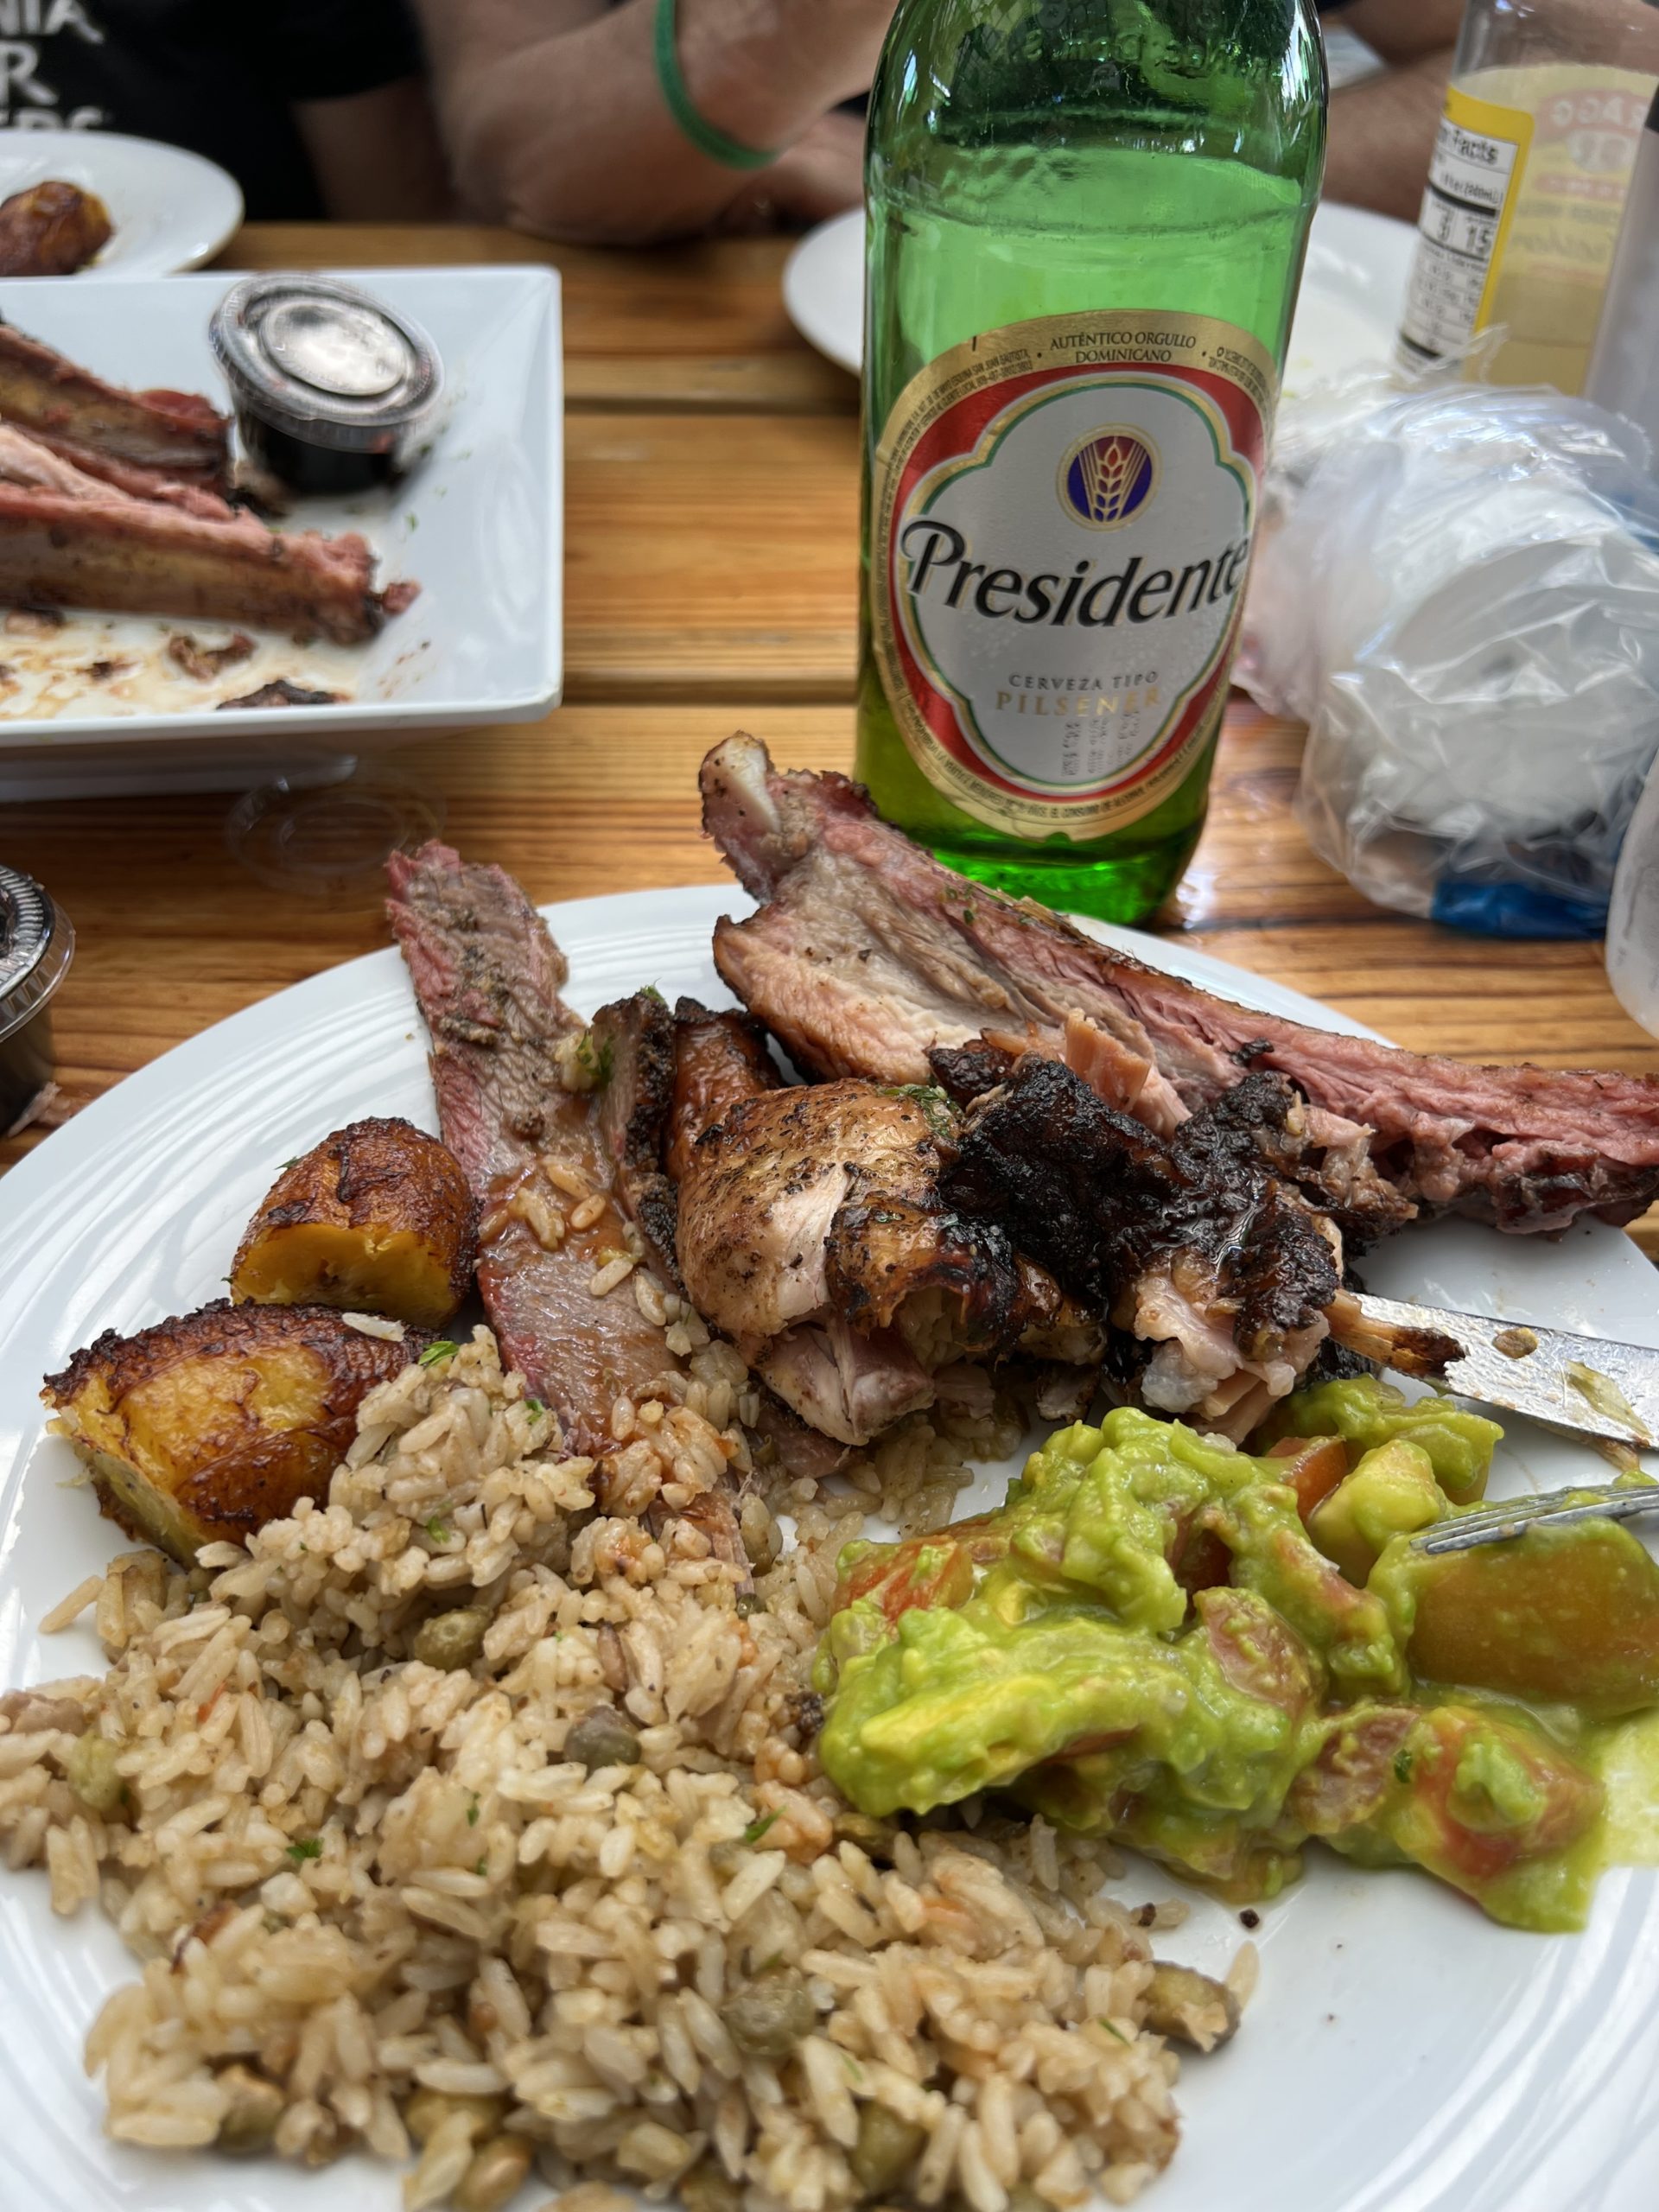 Absolutely delicious lunch from Parador Bella Mar smokehouse. They claim to have the best ribs in the Caribbean, and I have no reason to doubt them!